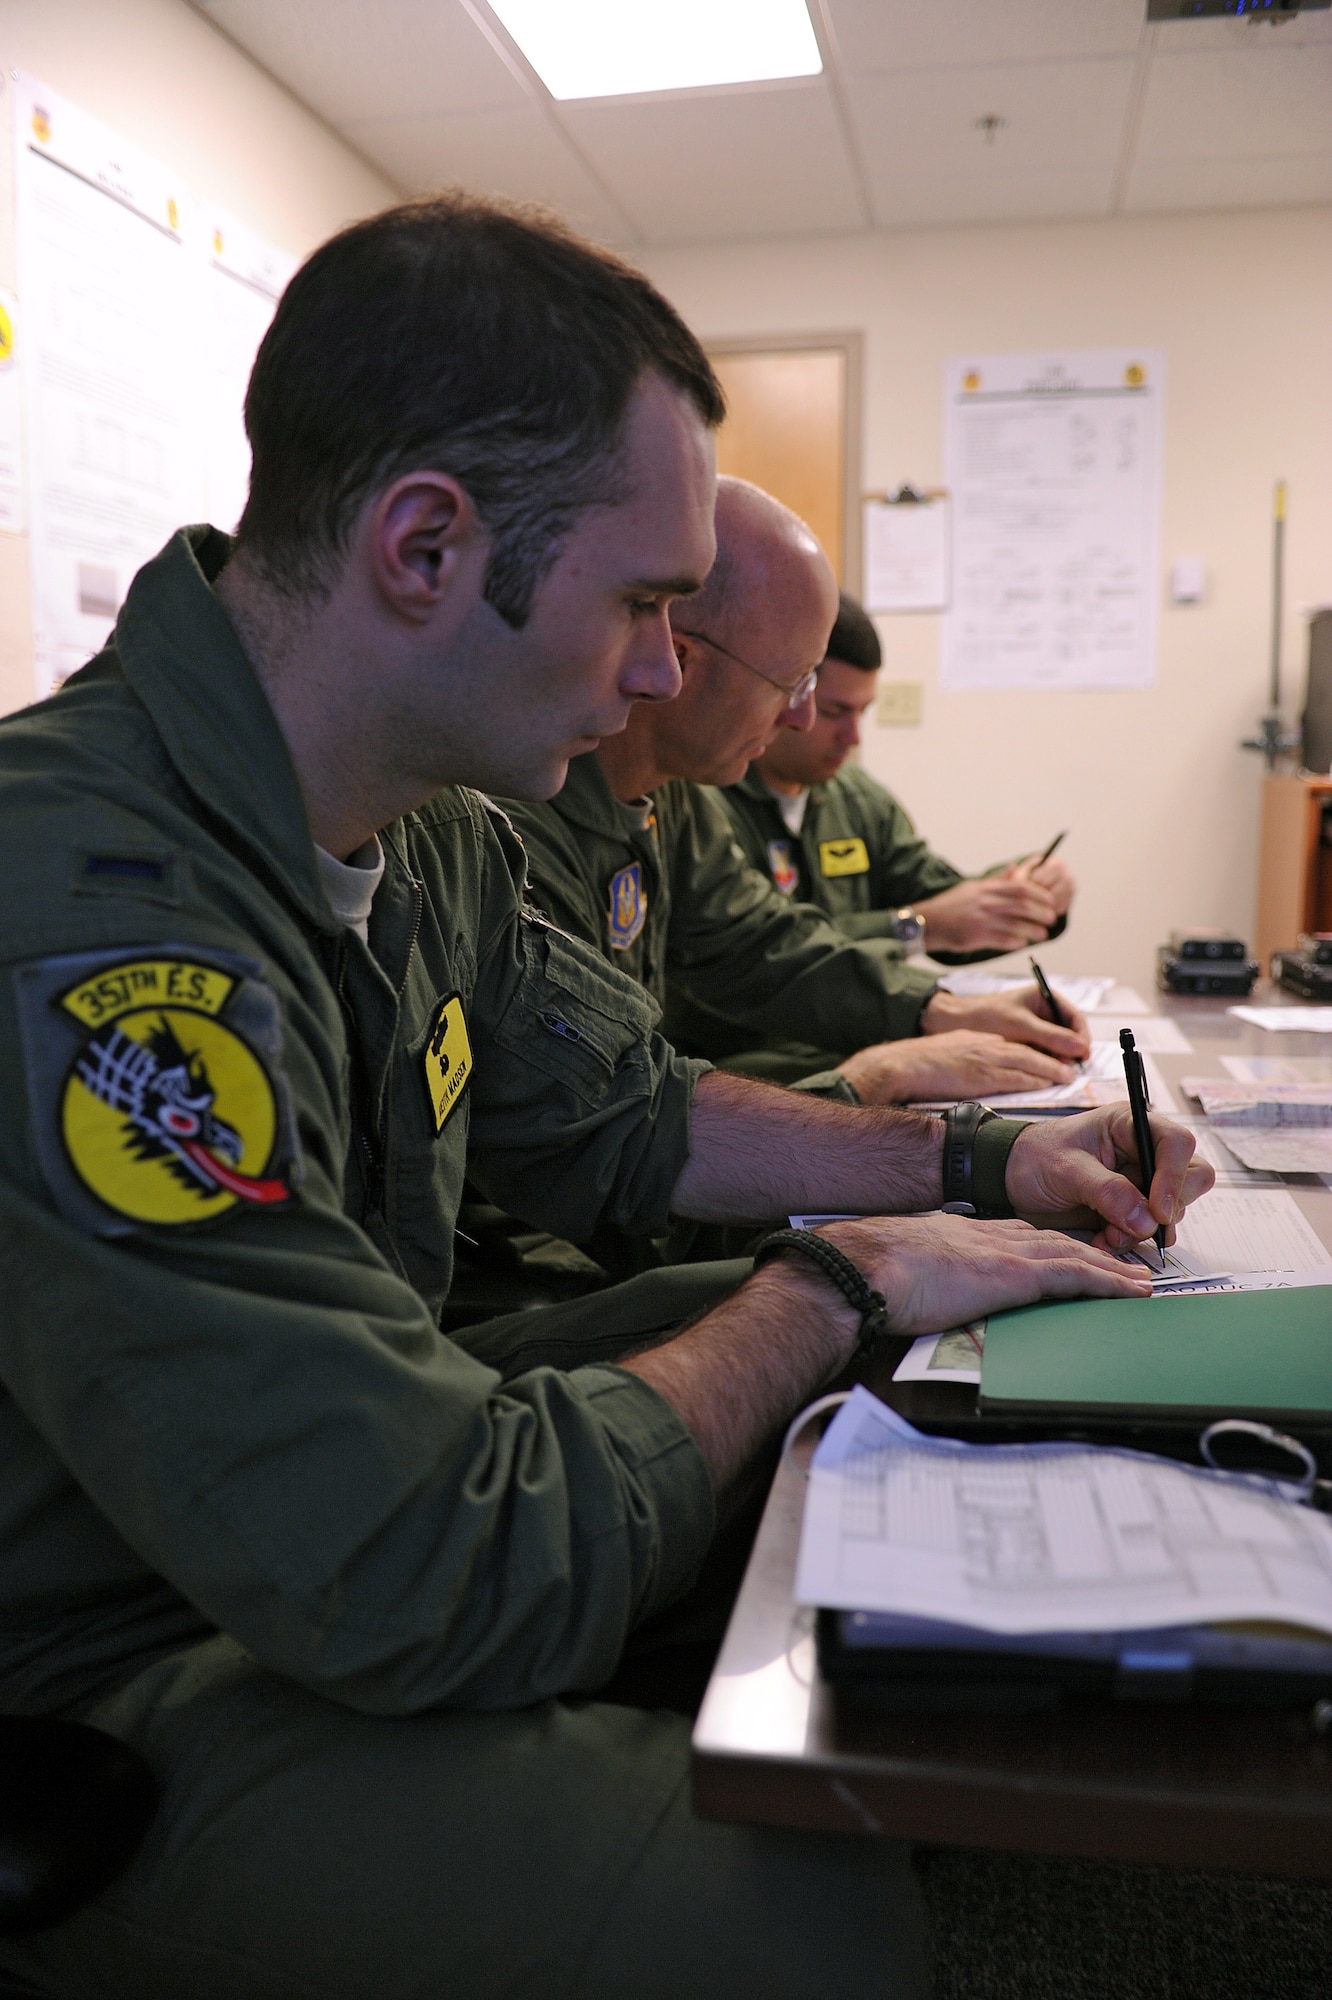 U.S Air Force A-10C student pilots from the 357th Fighter Squadron make corrections to their flight scenario during their flight briefing on Davis-Monthan Air Force Base, Ariz., Nov. 7, 2012. The 357th and 358th FS are currently the only A-10 aircraft pilot training squadrons in the Air Force. (U.S. Air Force photo by Airman 1st Class Christine Griffiths/Released) 